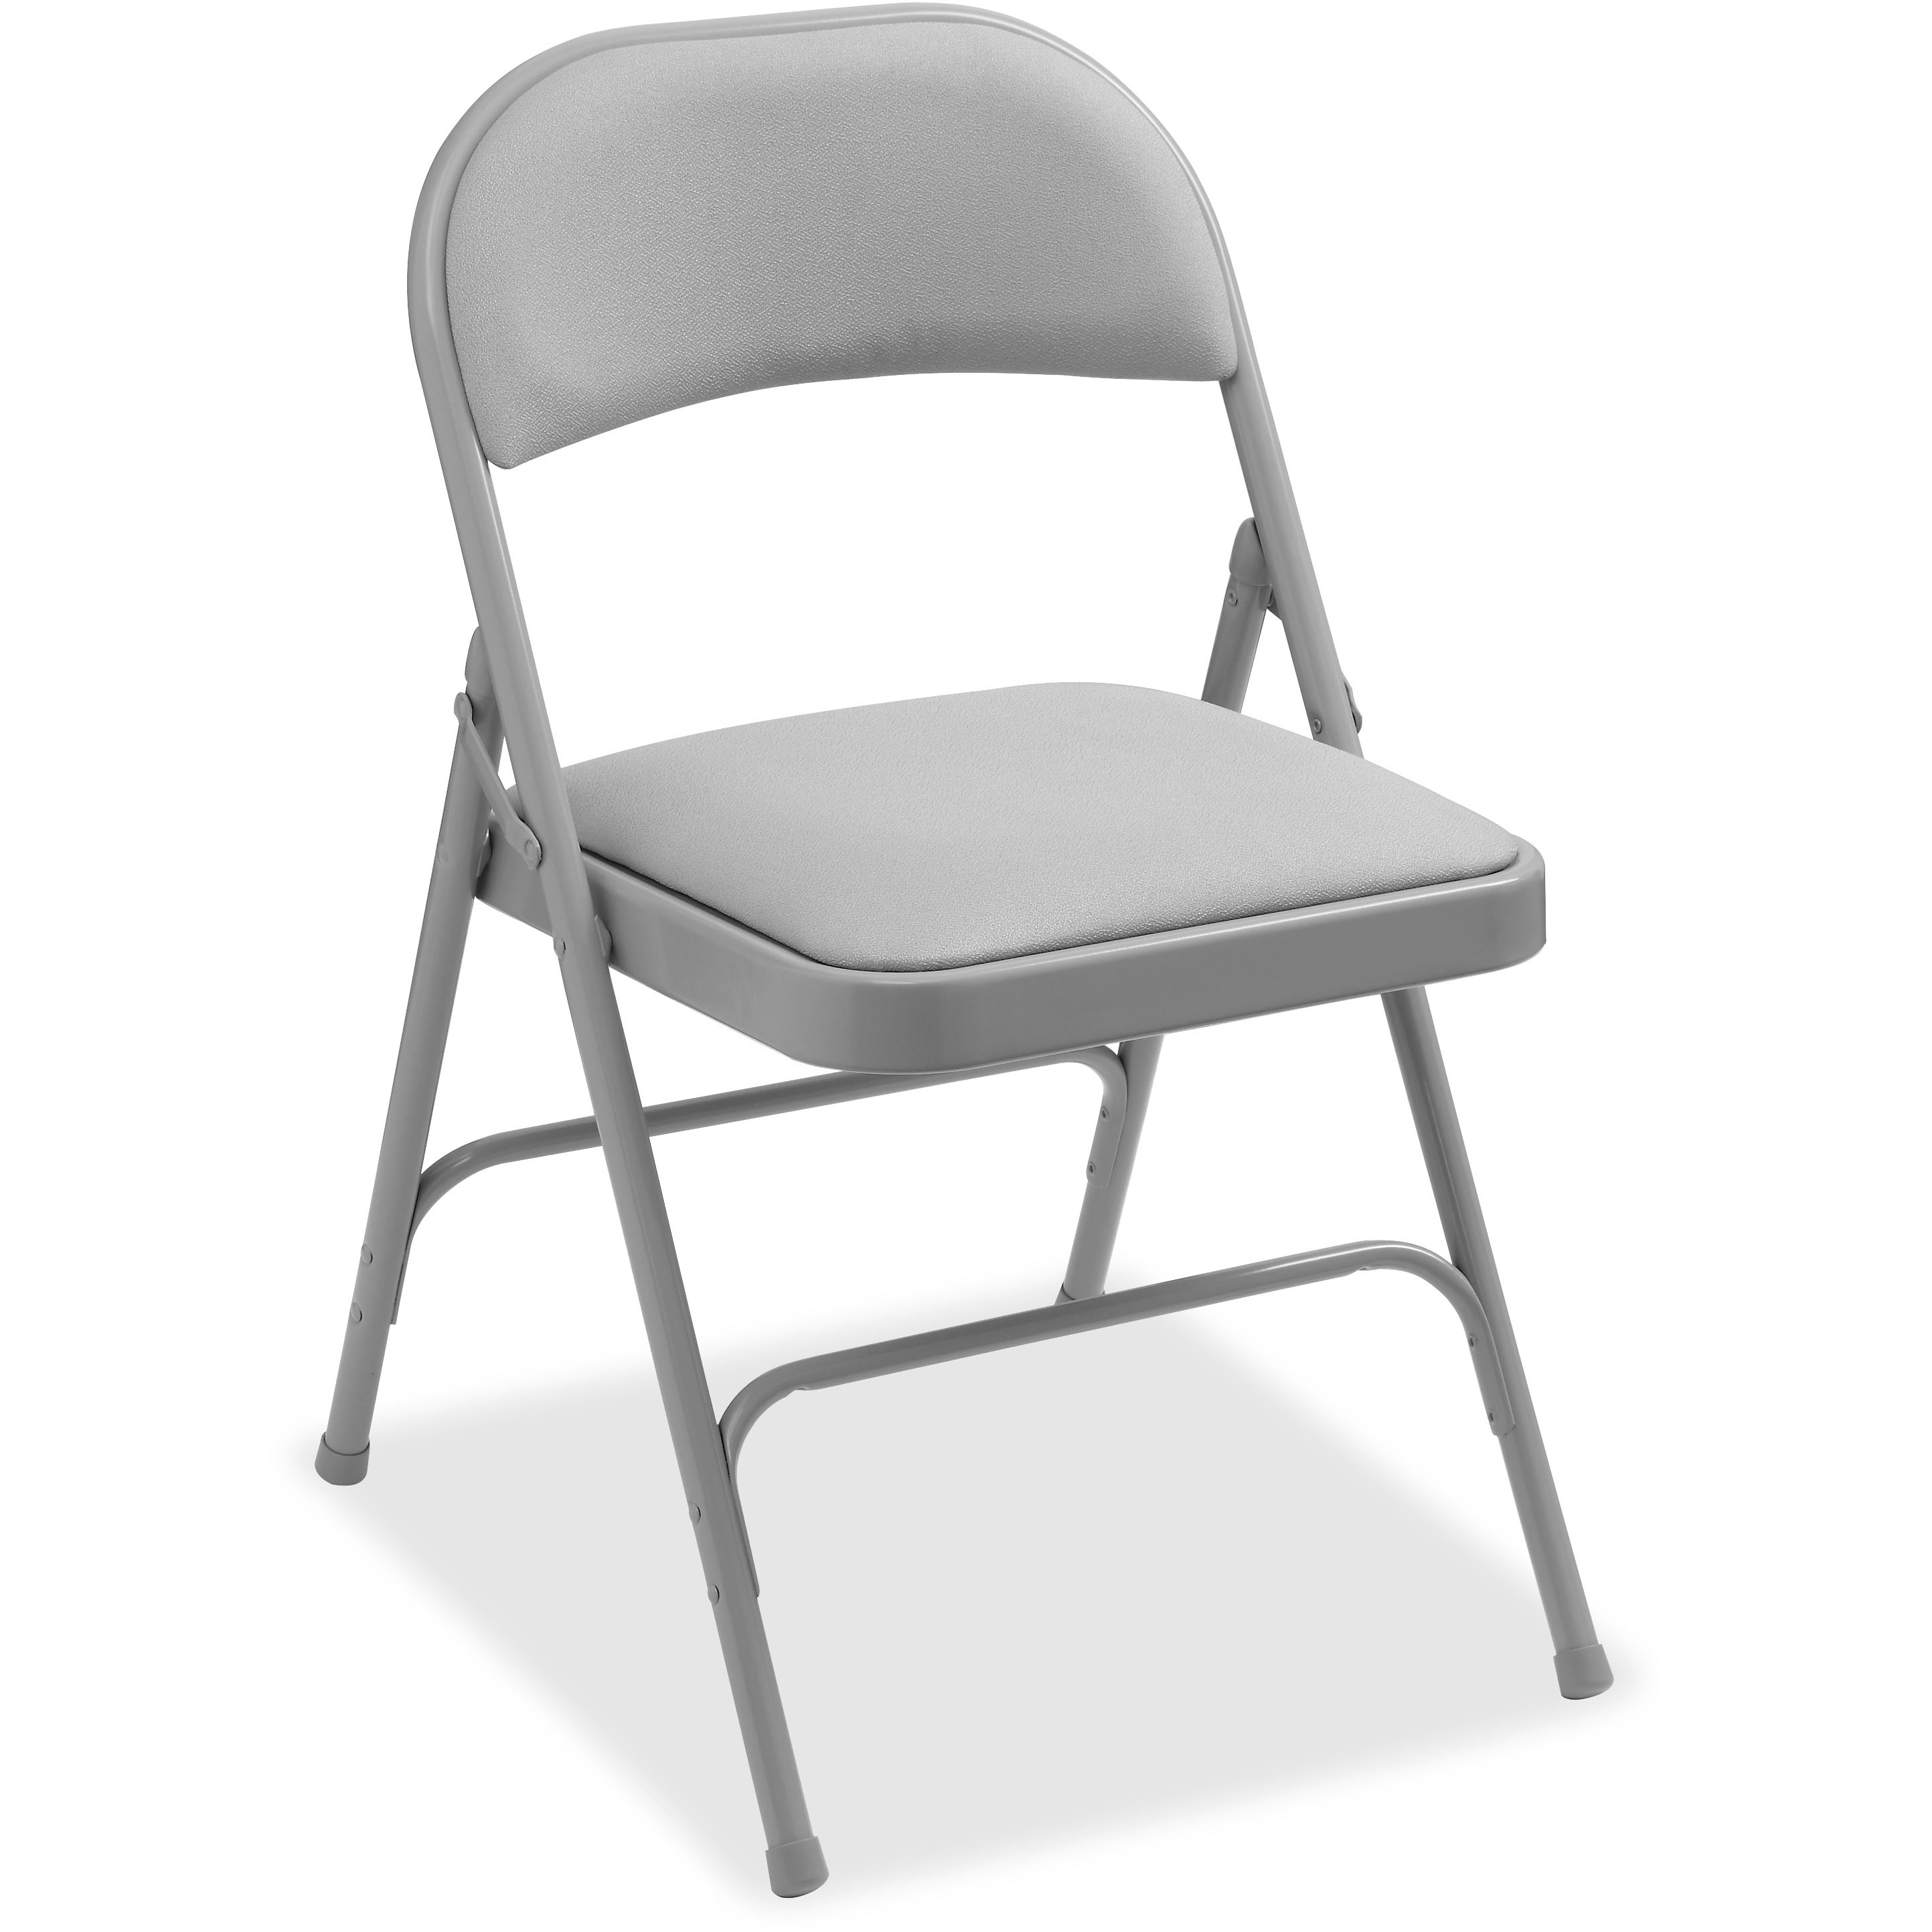 padded folding chairs        <h3 class=